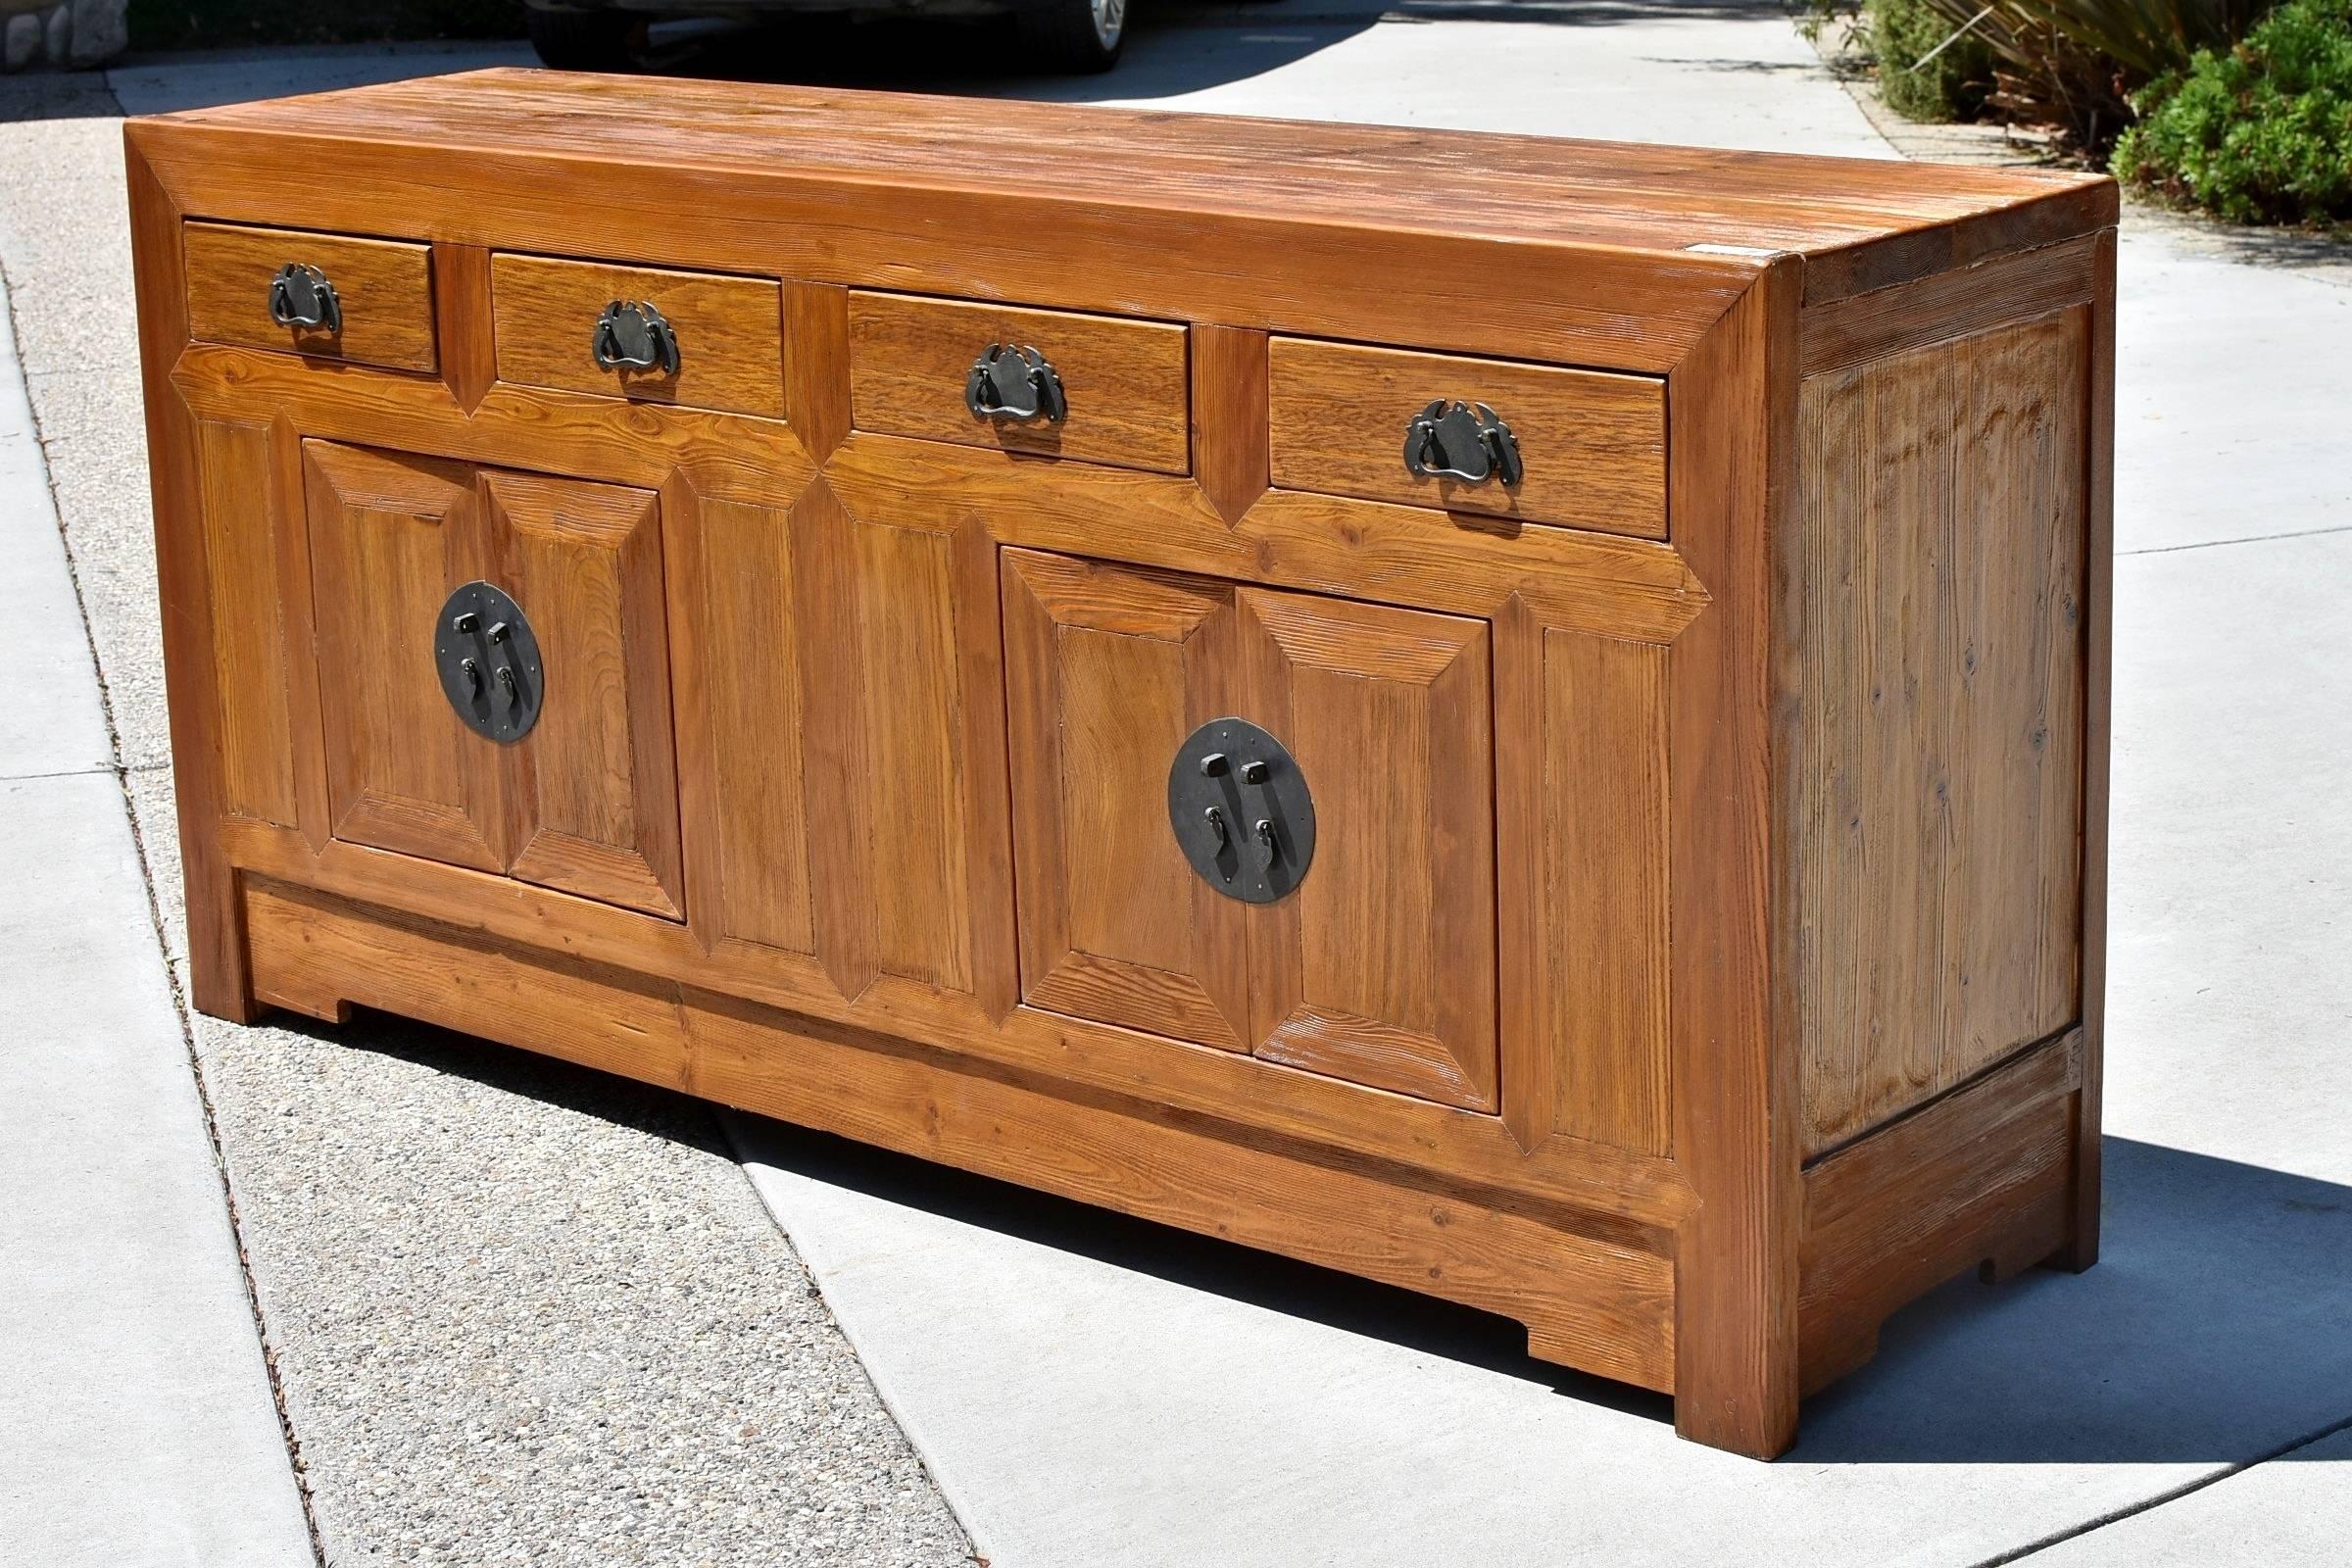 Beautiful chest is handmade using the best elmwood that showcases its amazing mountain-like grains. Four large drawers and compartments concealed by two pairs of doors offer ample storage. Handsome brass hardware enhances its timeless appeal. This